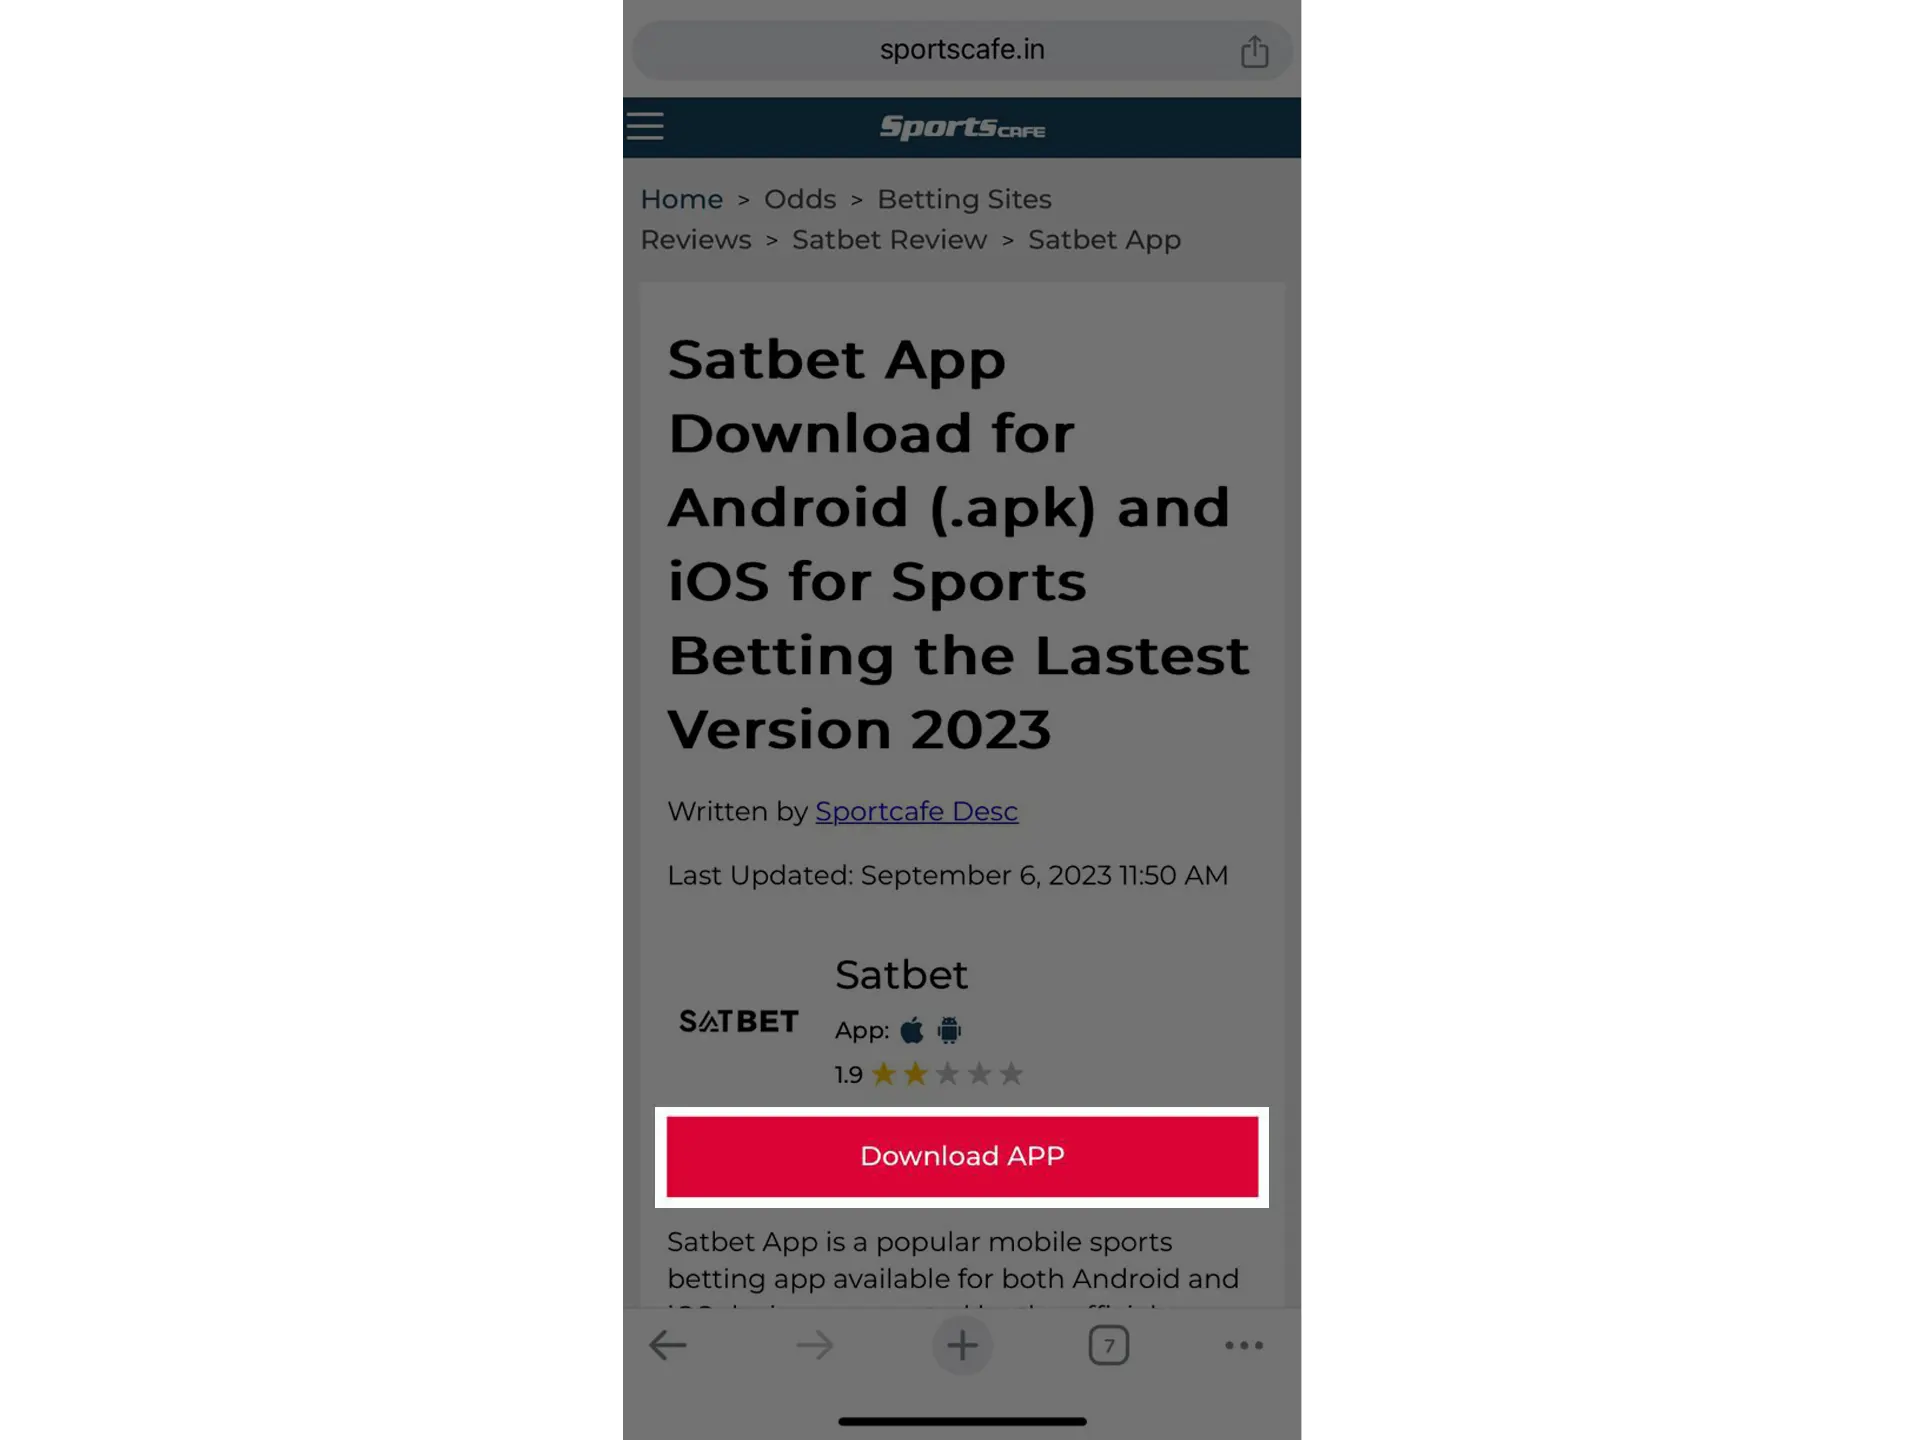 Follow the link to go to the official website of Satbet.